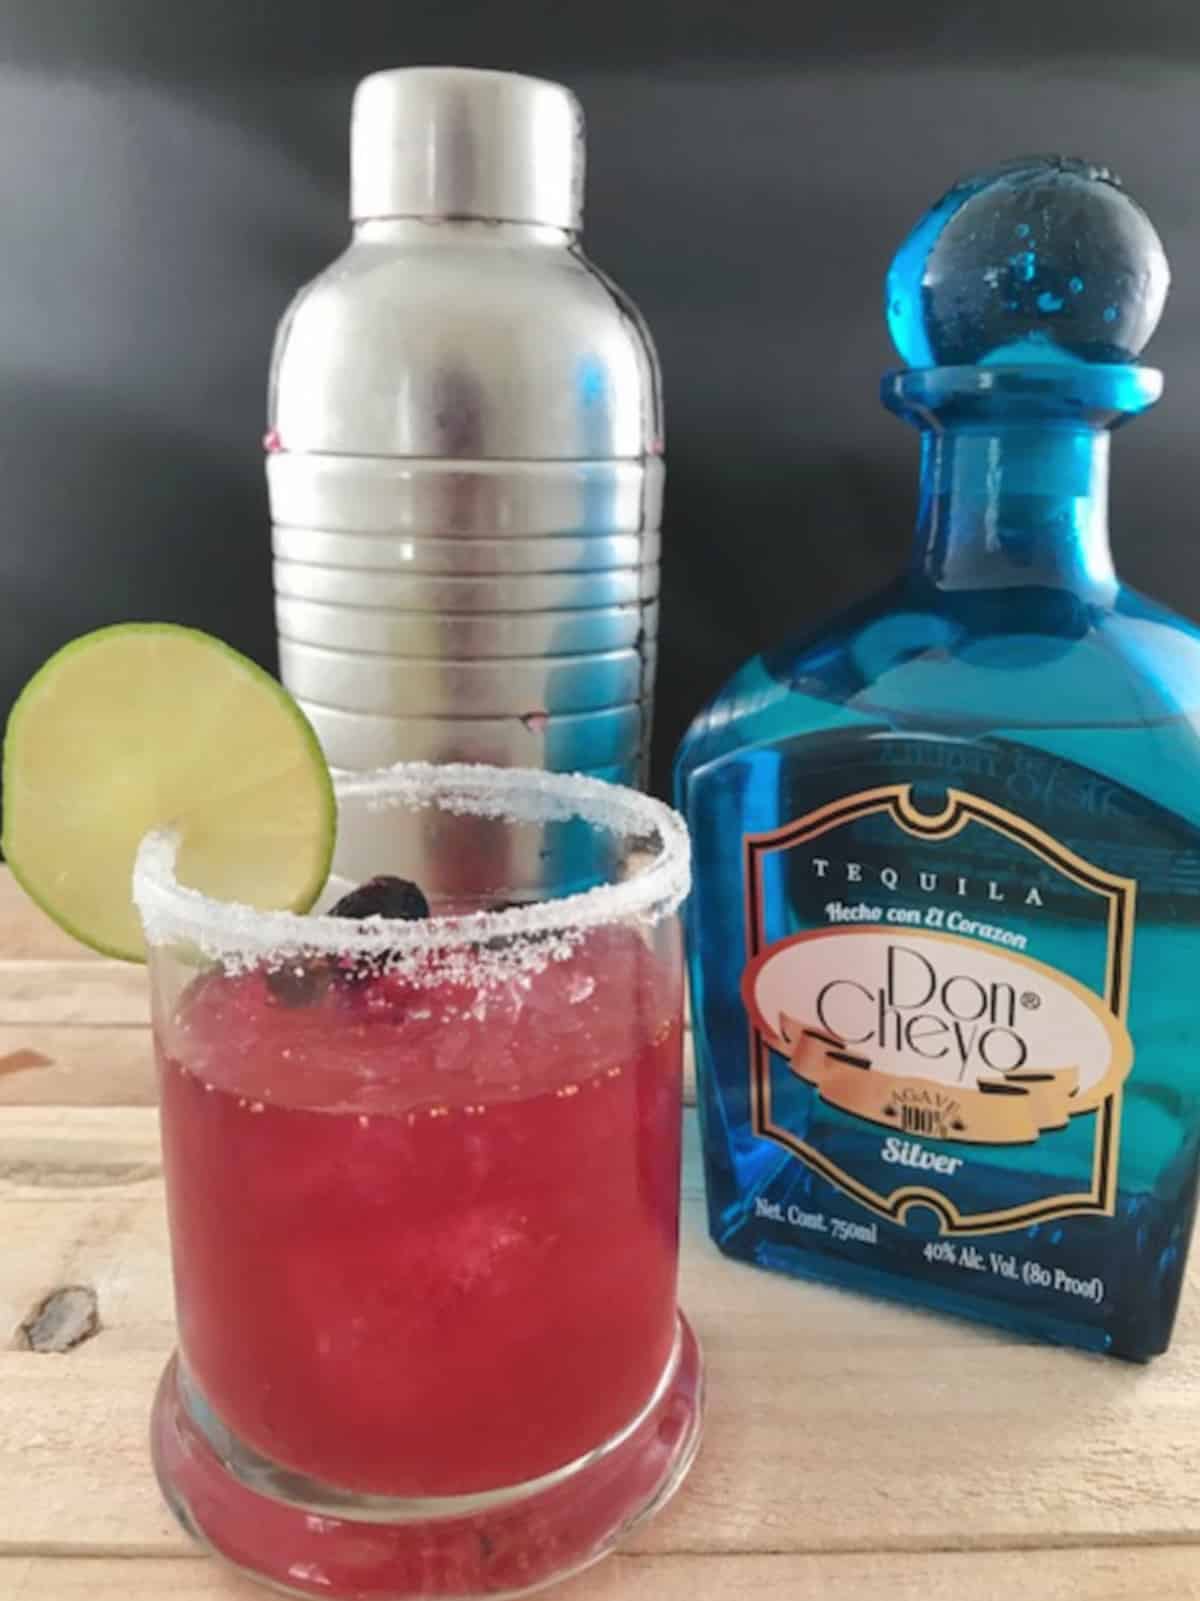 Blueberry margarita garnished with a lime wheel next to a silver cocktail shaker and blue tequila bottle.